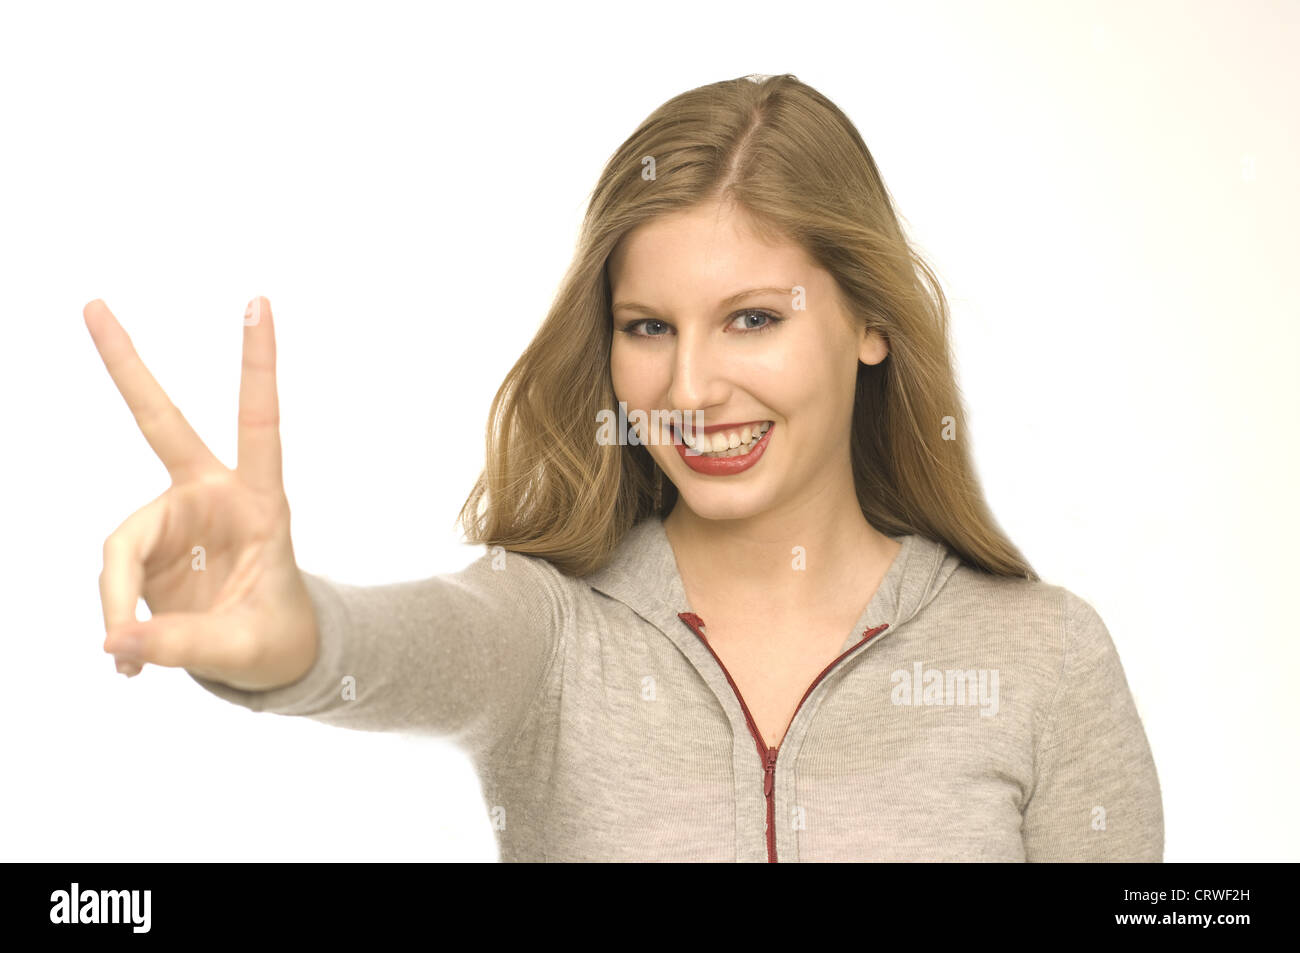 woman does victorysign Stock Photo